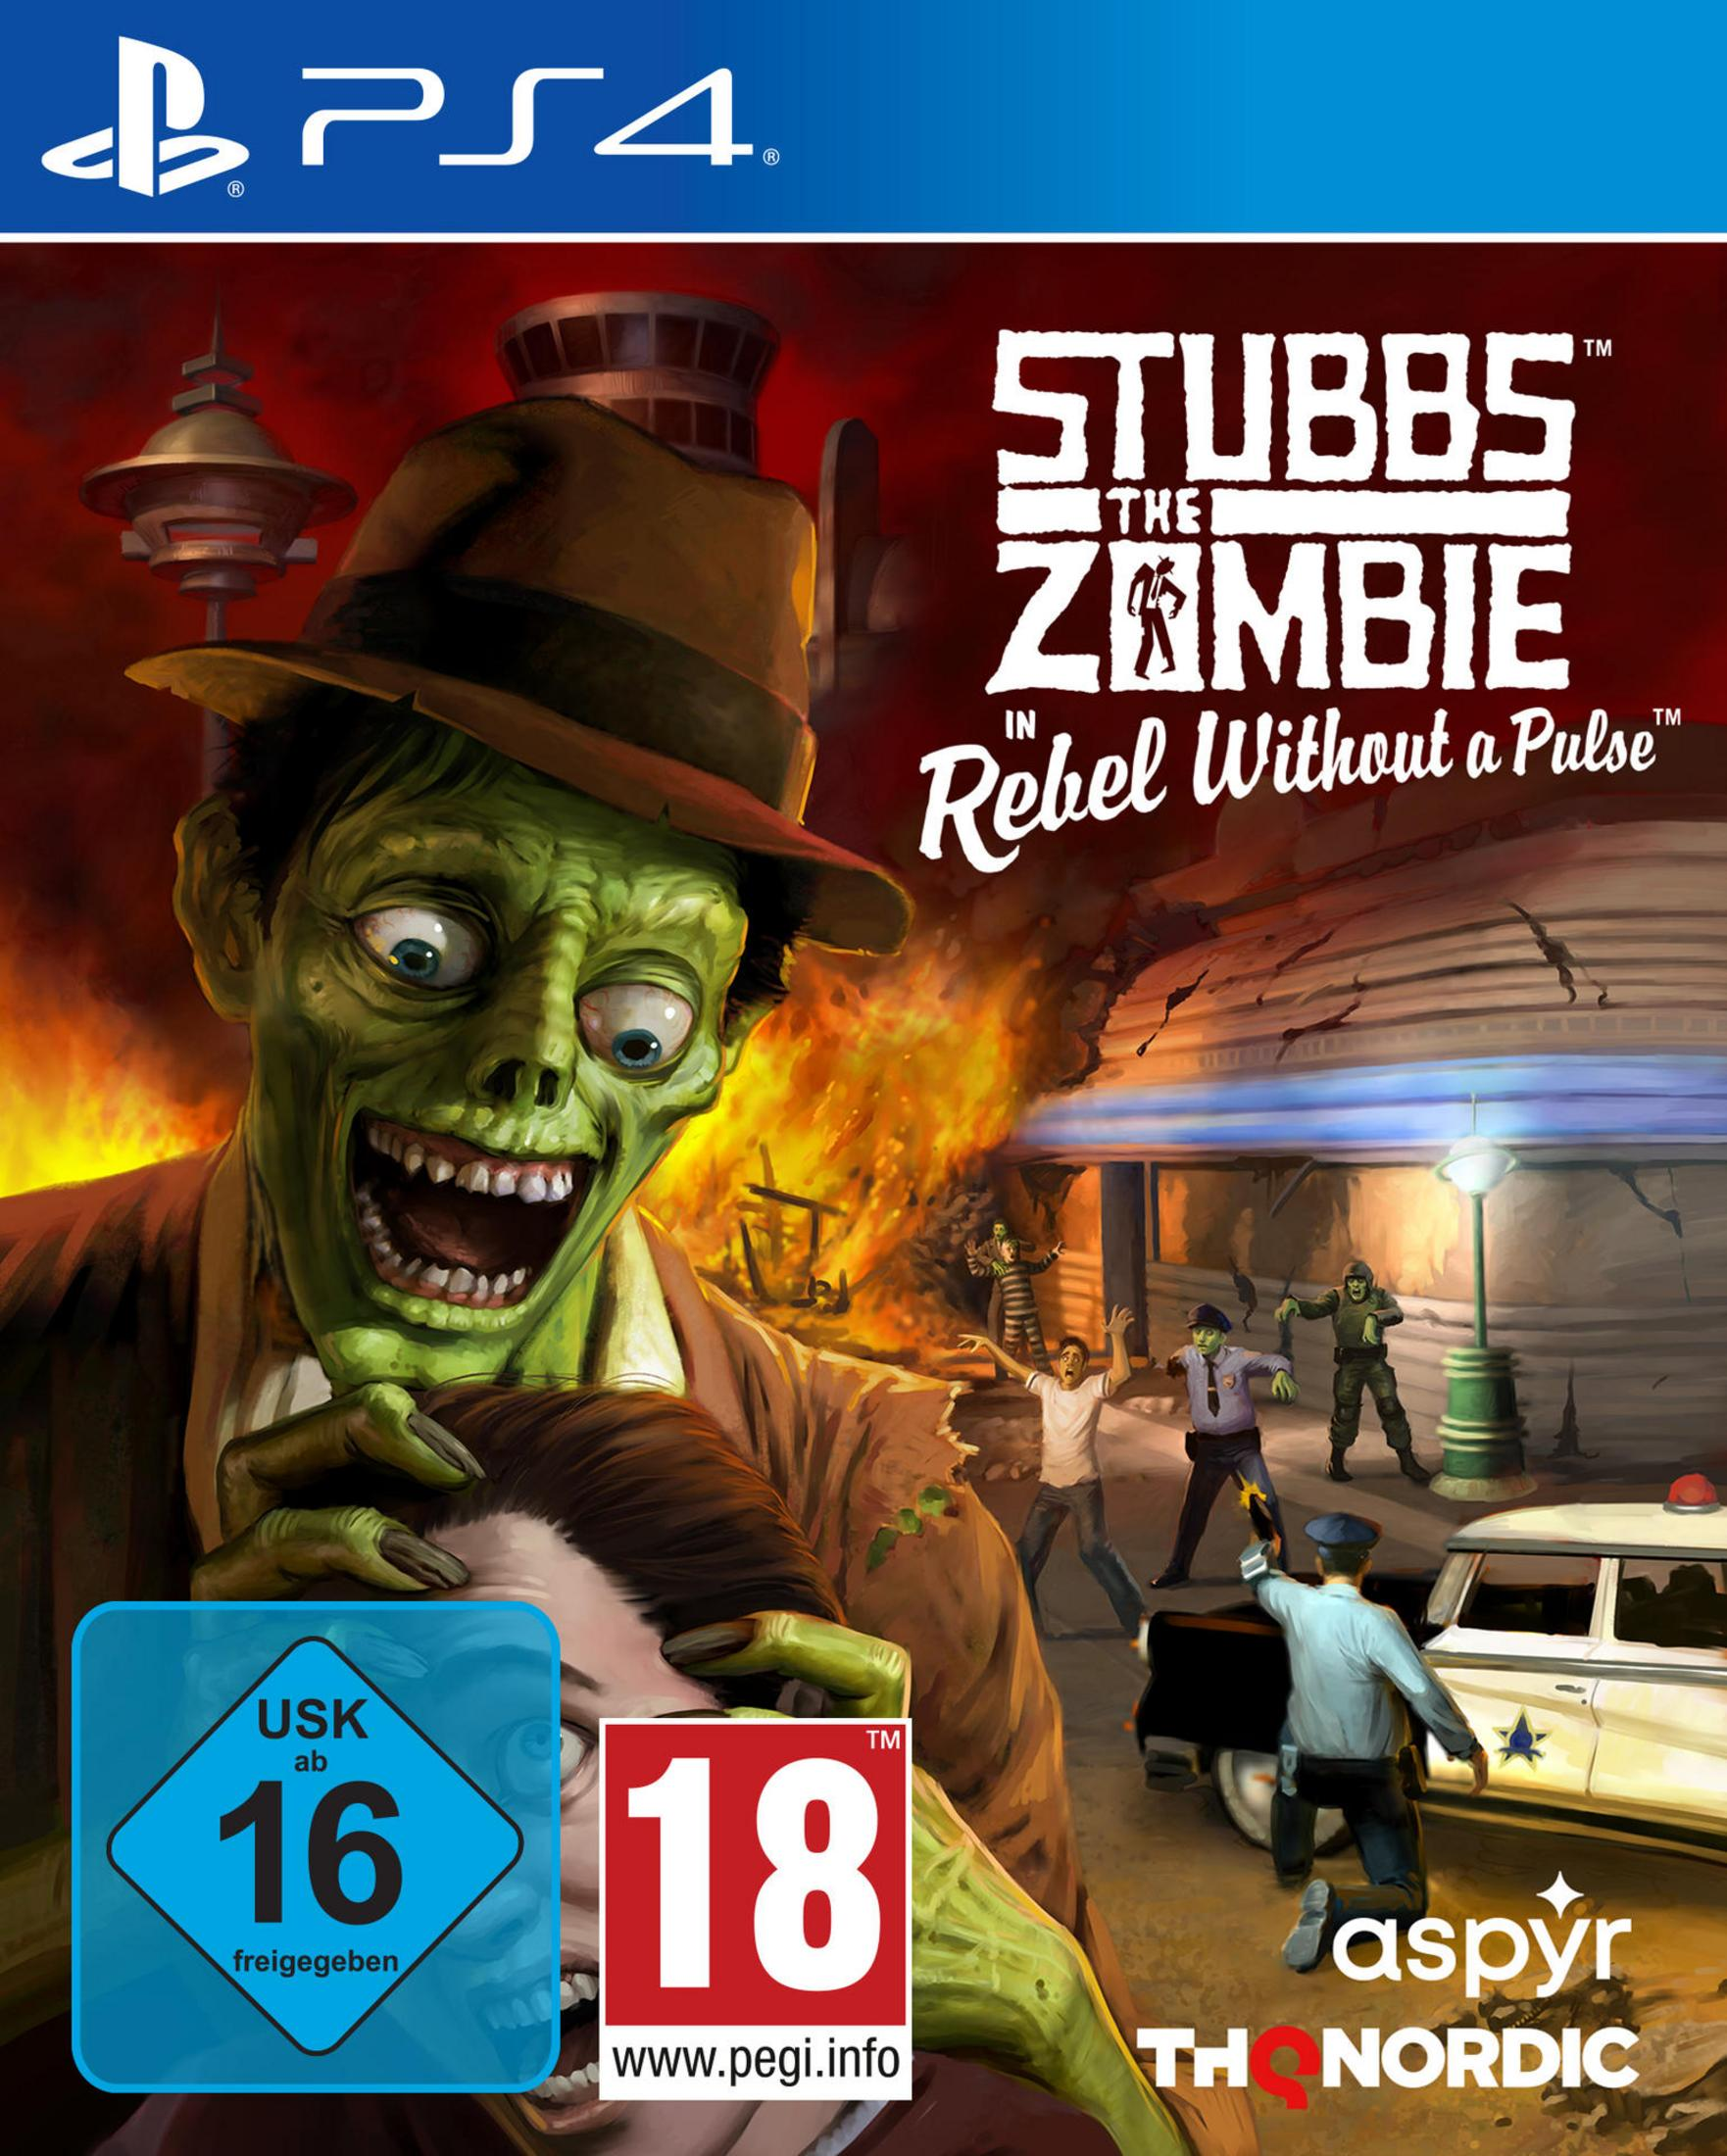 Stubbs the Zombie Rebel Pulse Without 4] PS-4 a in [PlayStation 